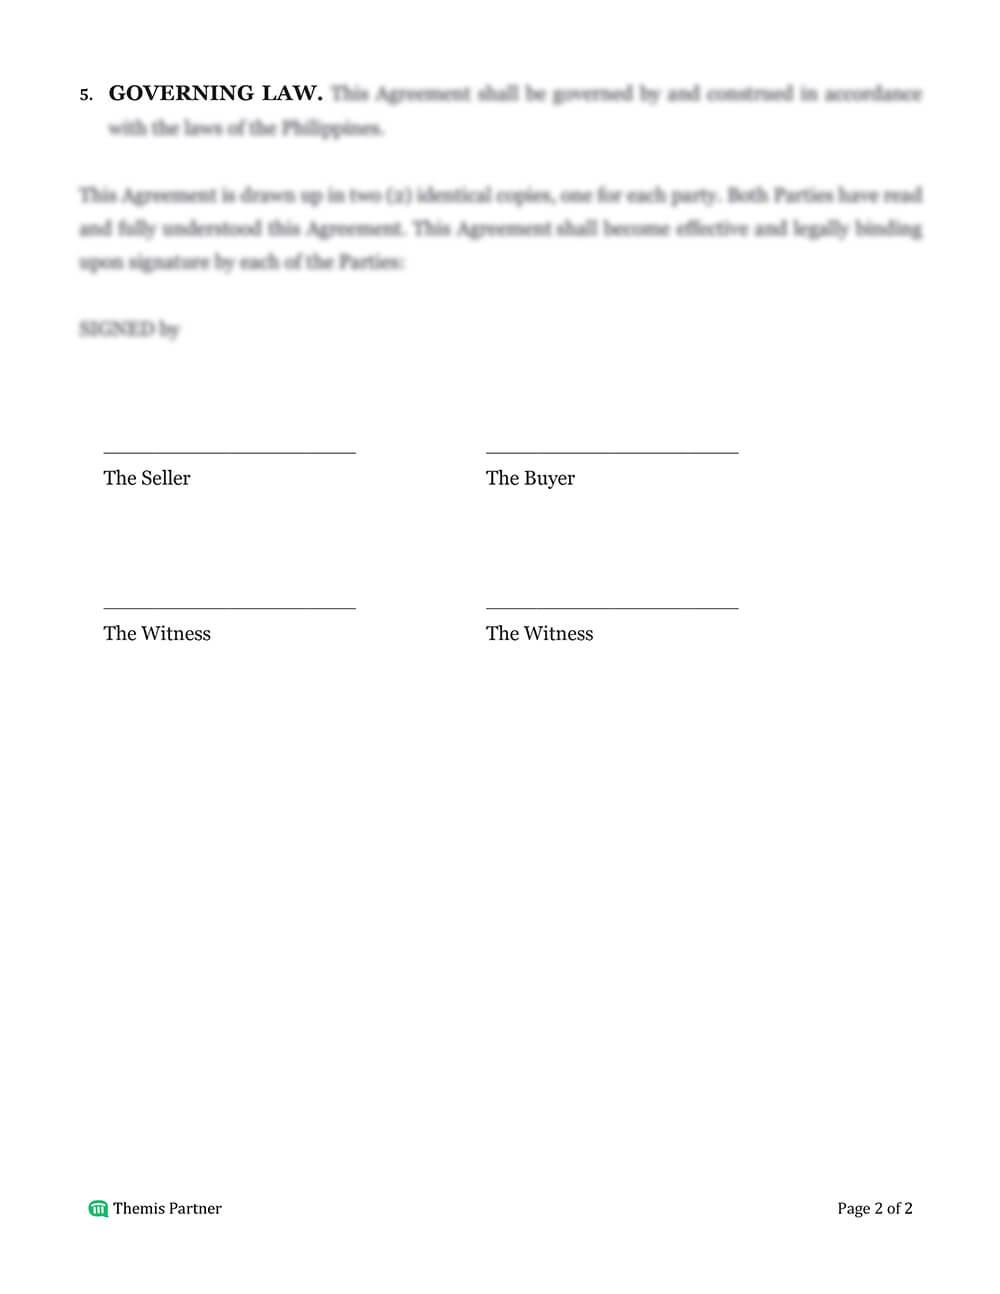 Share purchase agreement template 2